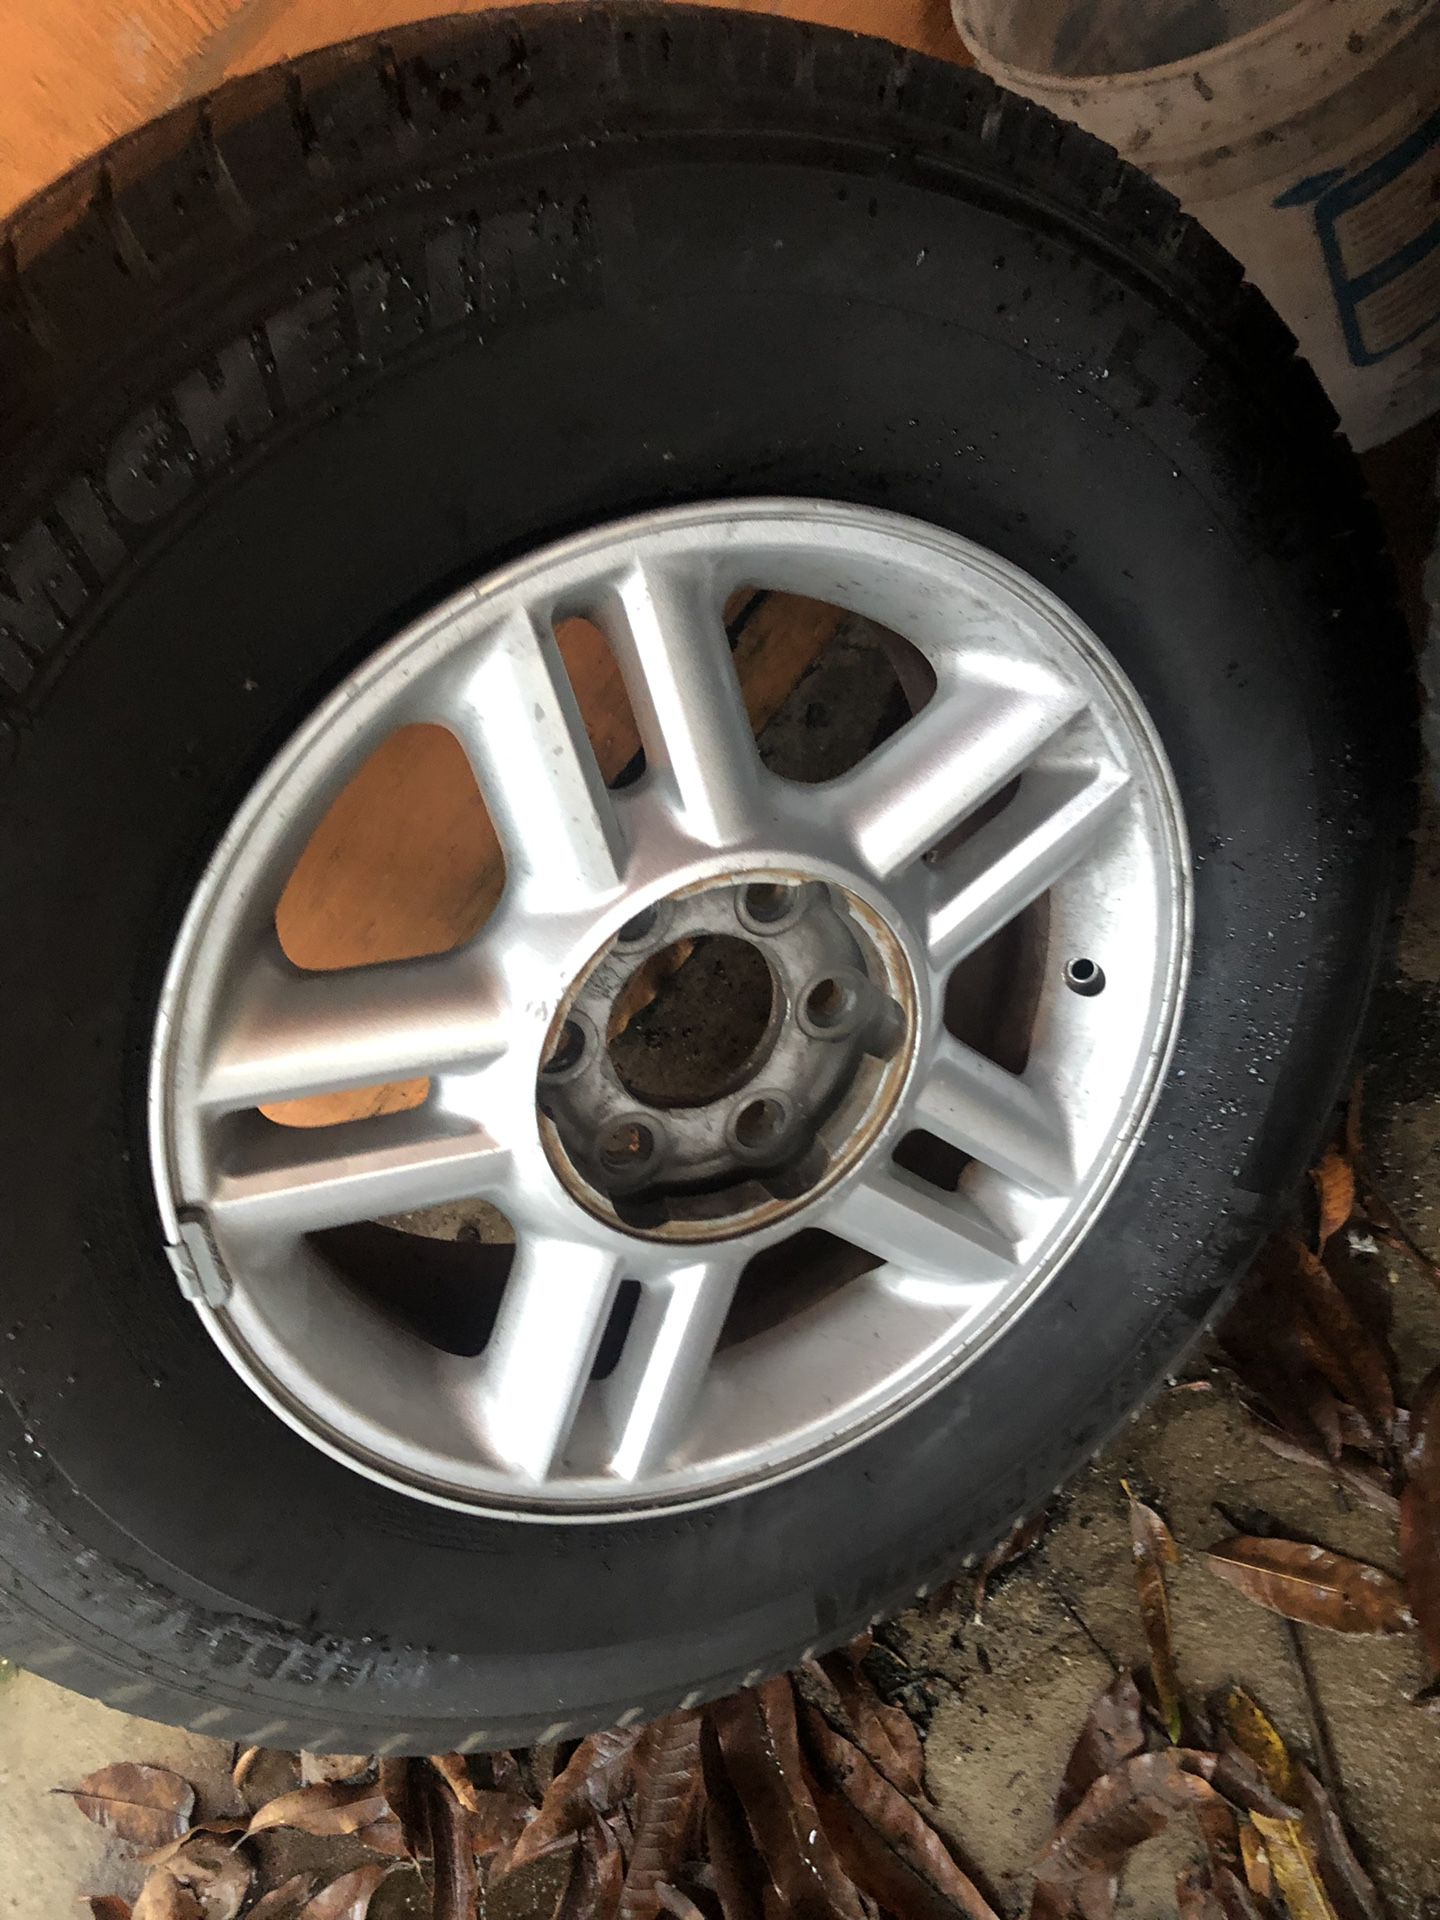 Expedition or f150 tires and rim